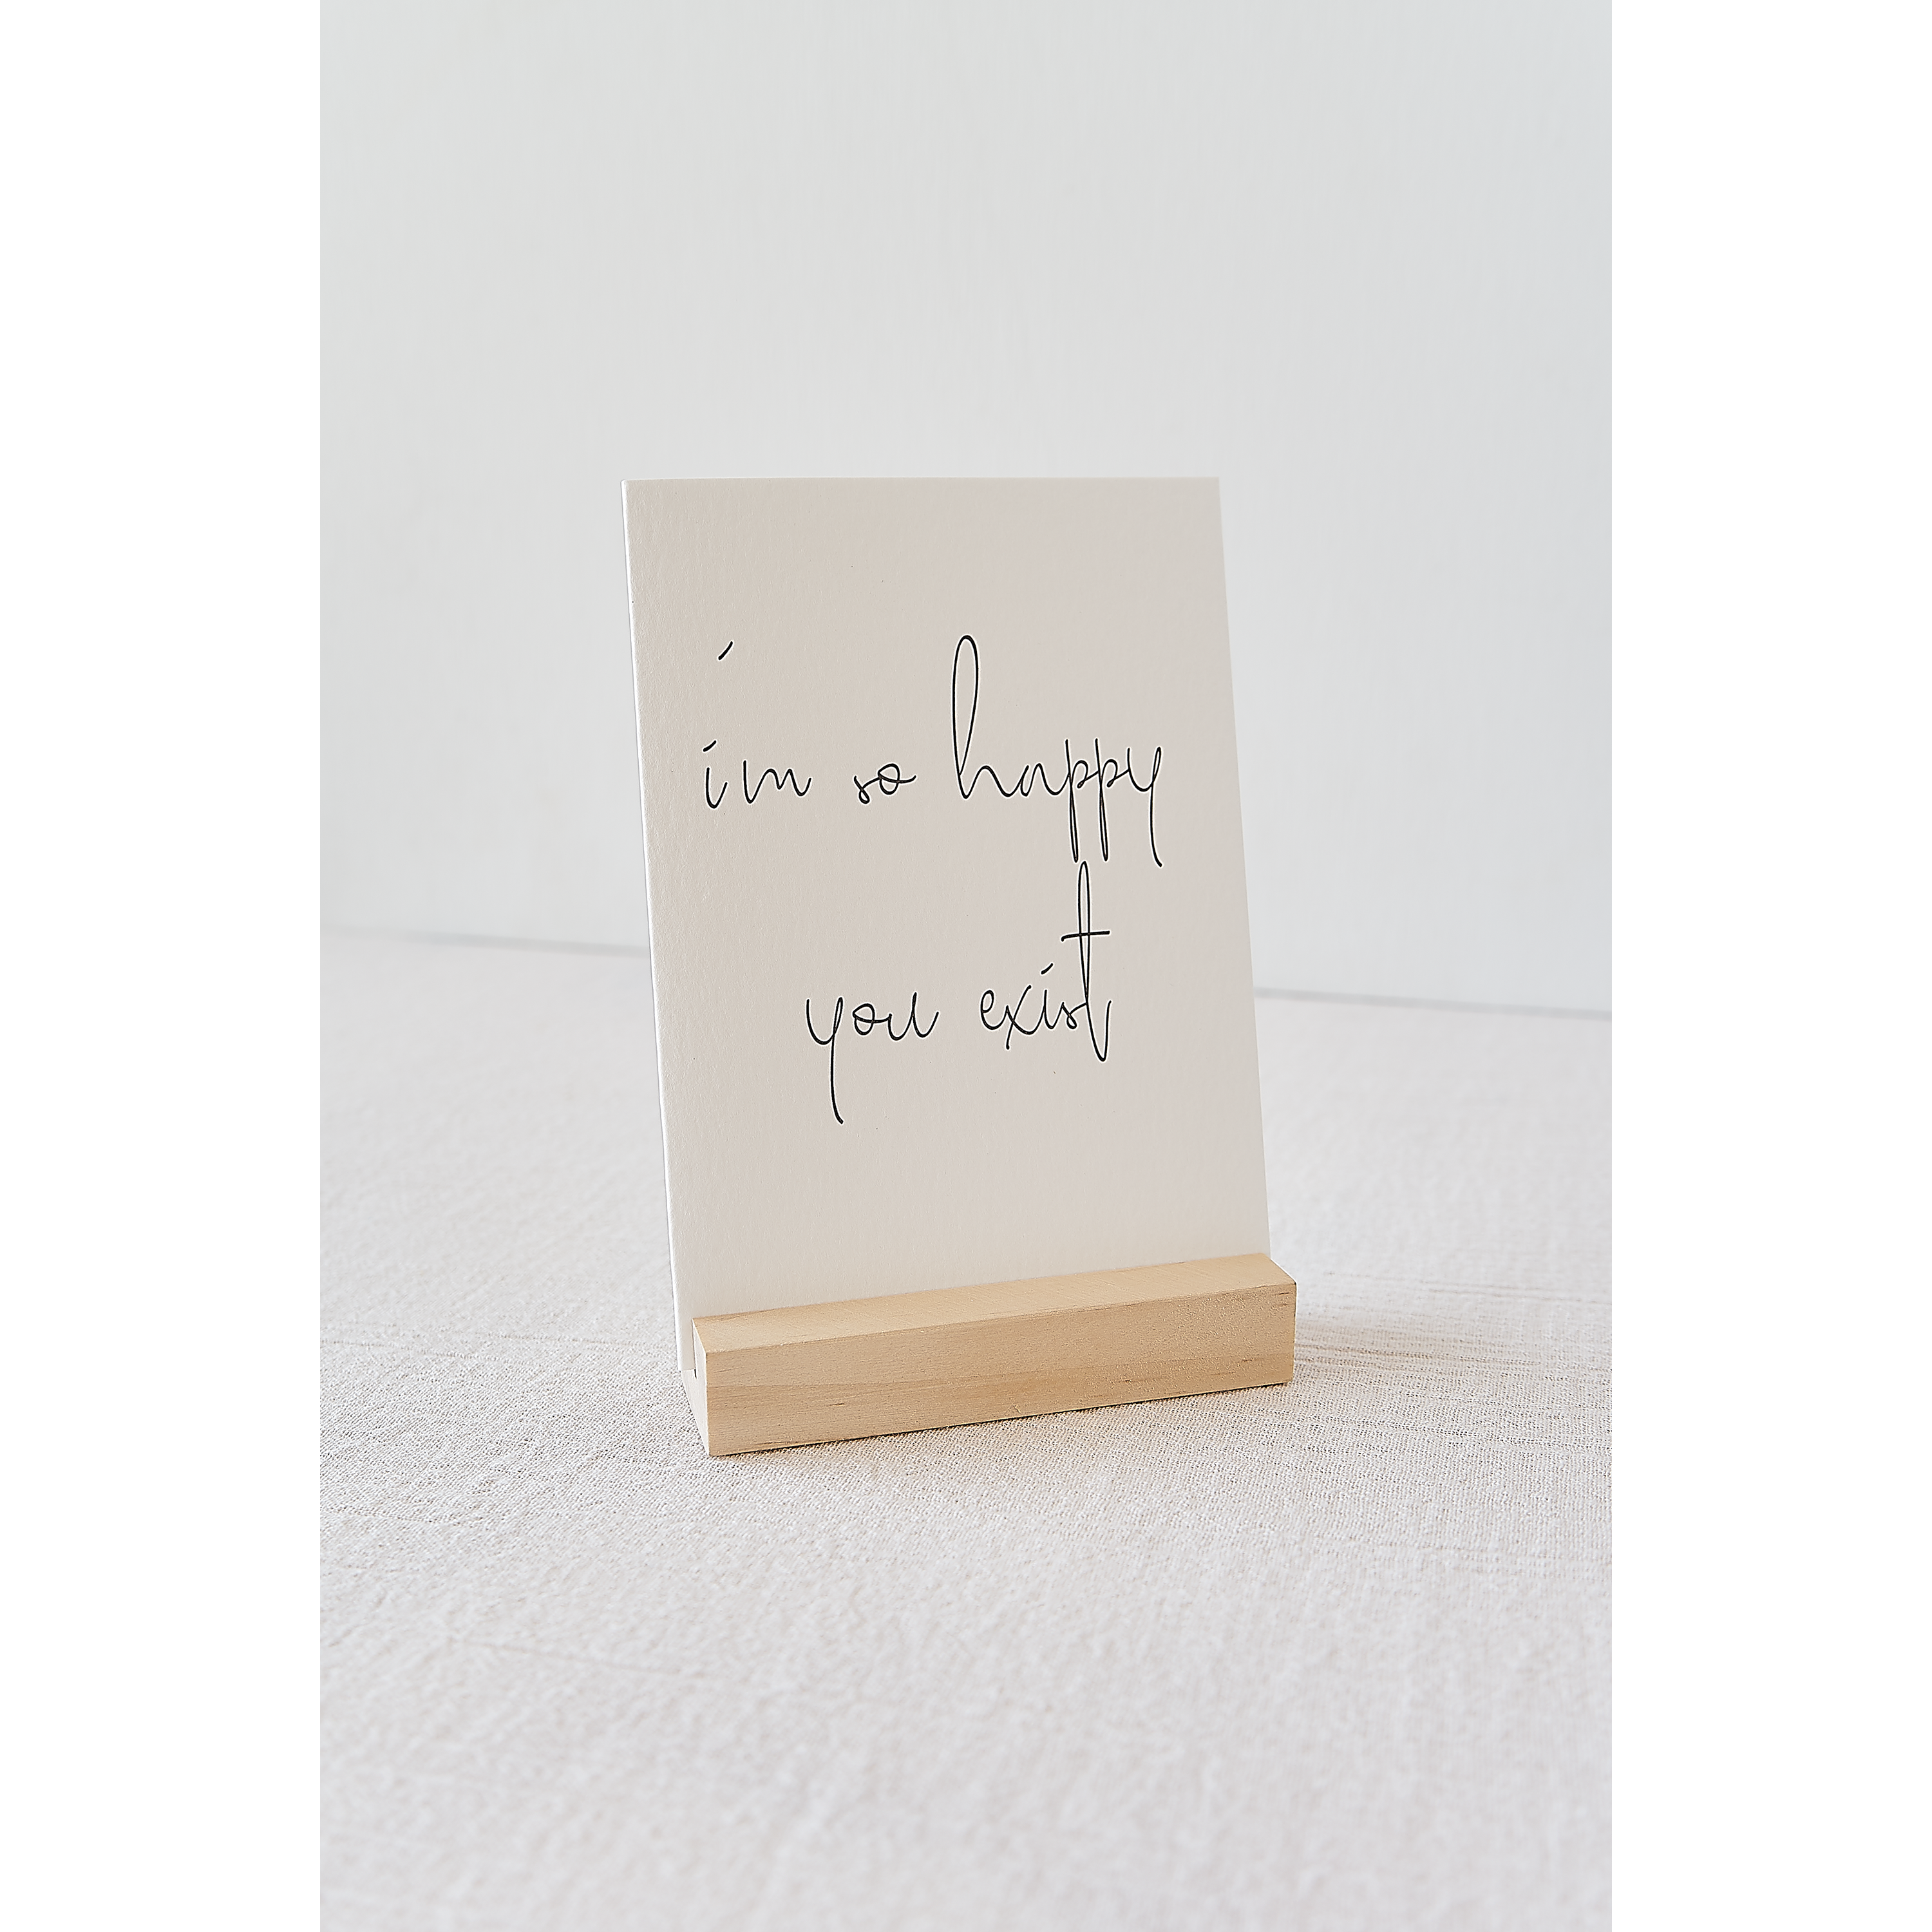 Clare Bernadette 'Happy You Exist' Gift Card